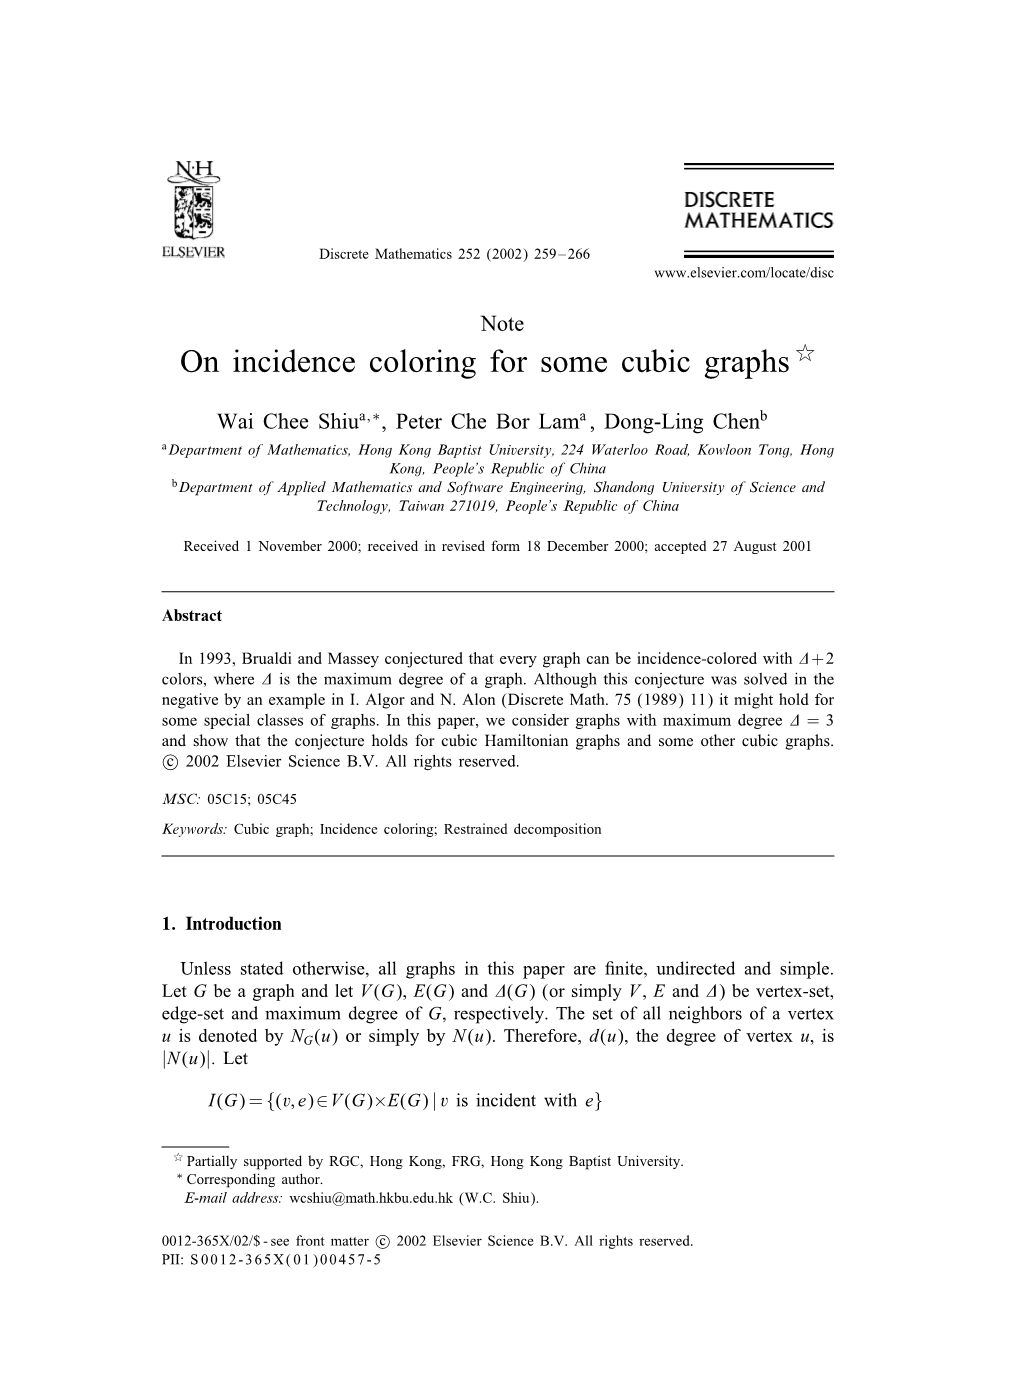 On Incidence Coloring for Some Cubic Graphs 